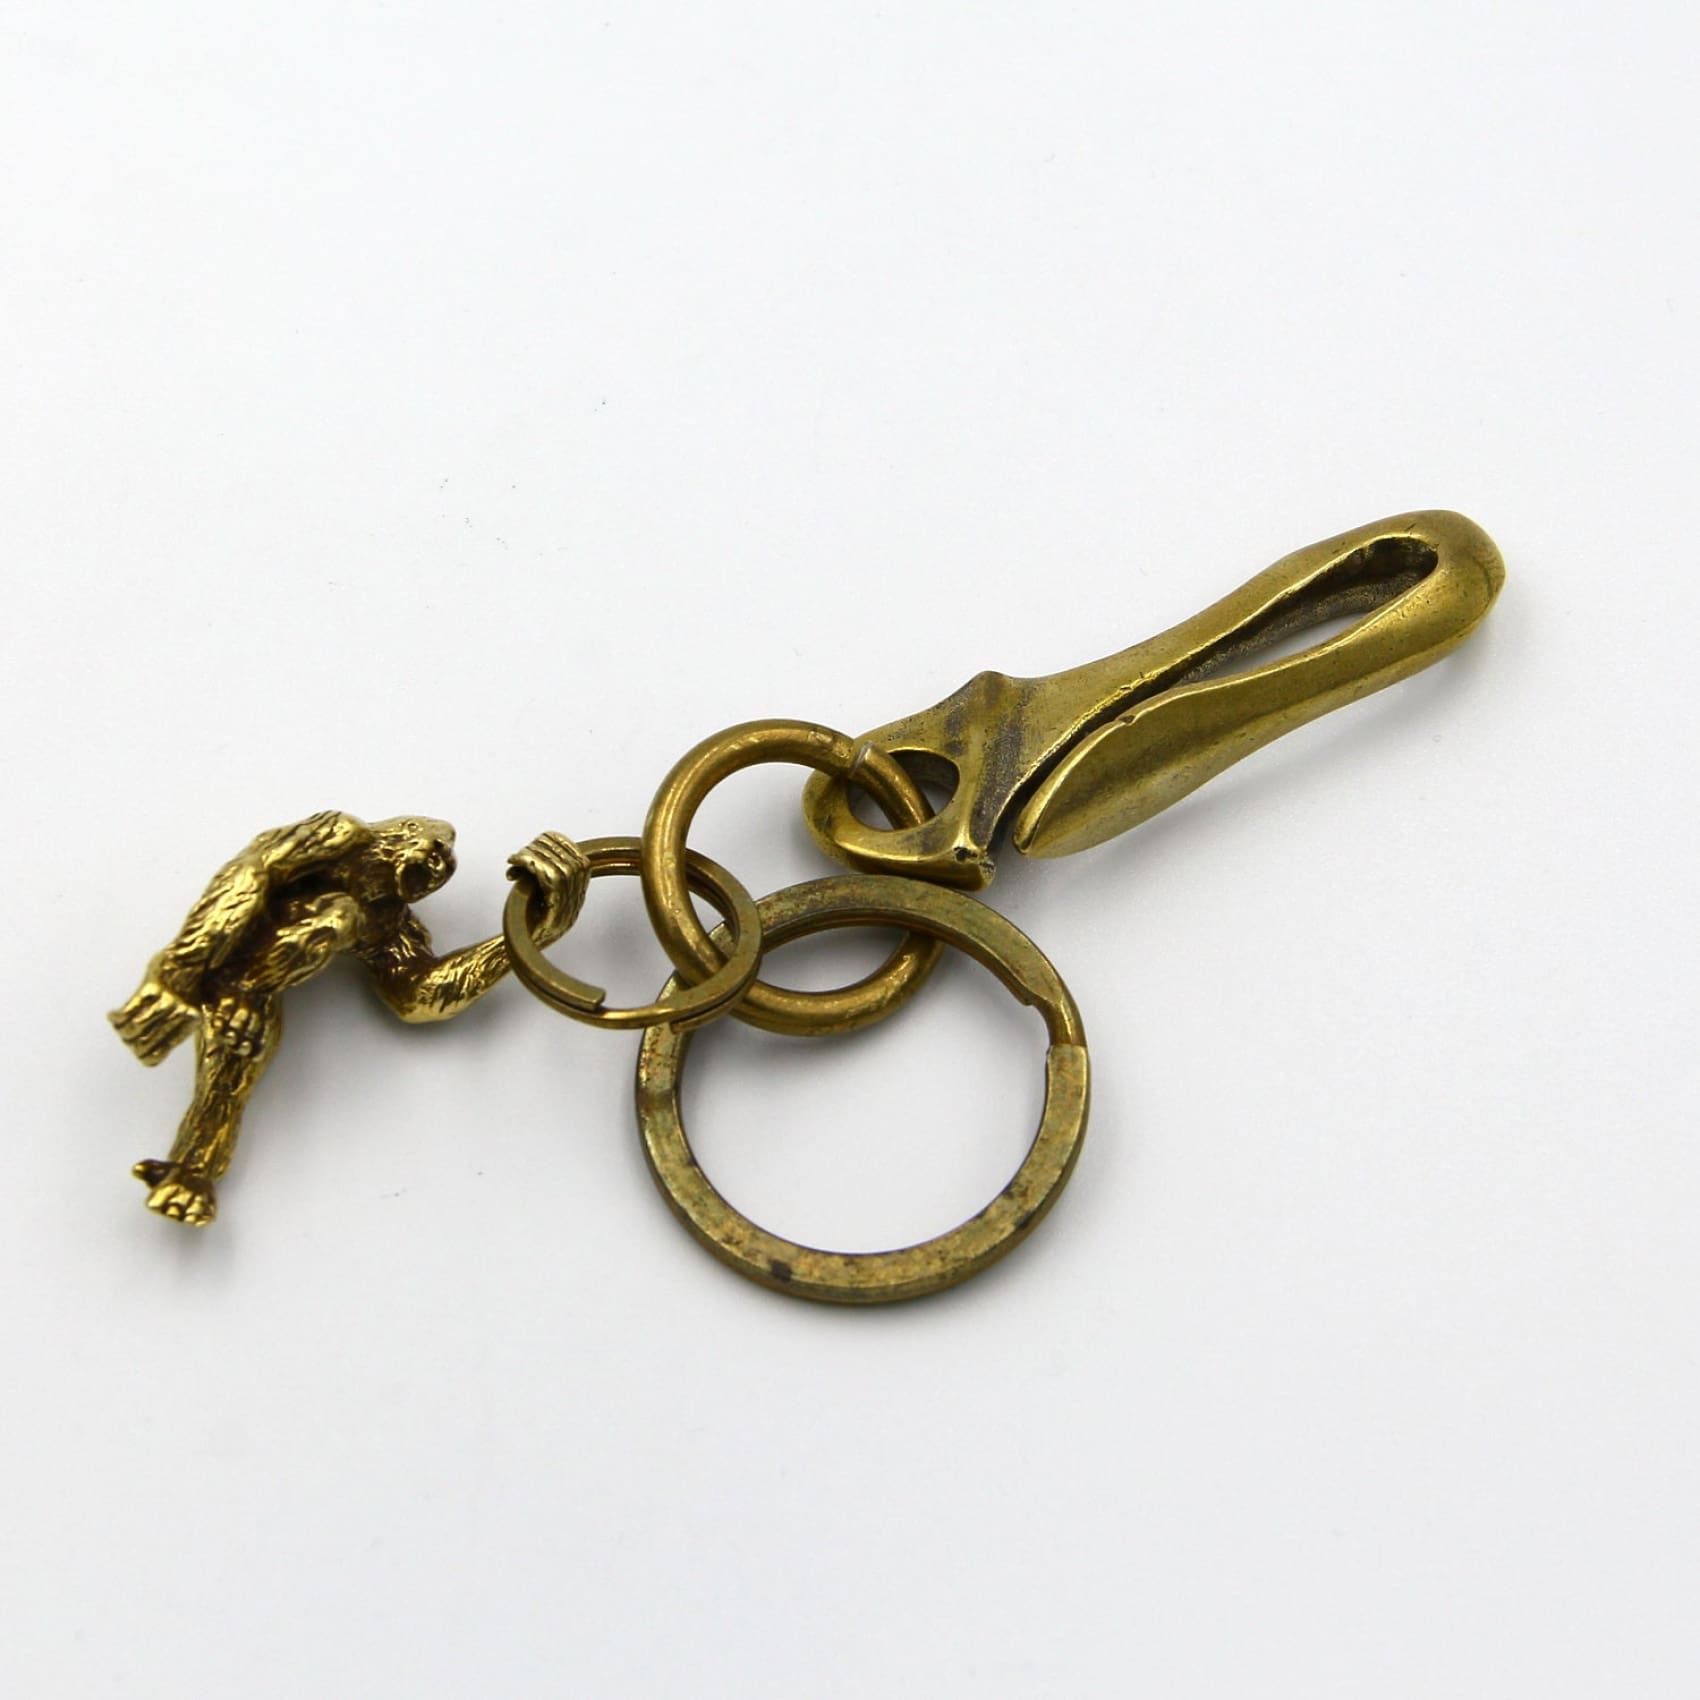 Classic Style Mens Key Chain Manager Exclusive Design - Metal Field